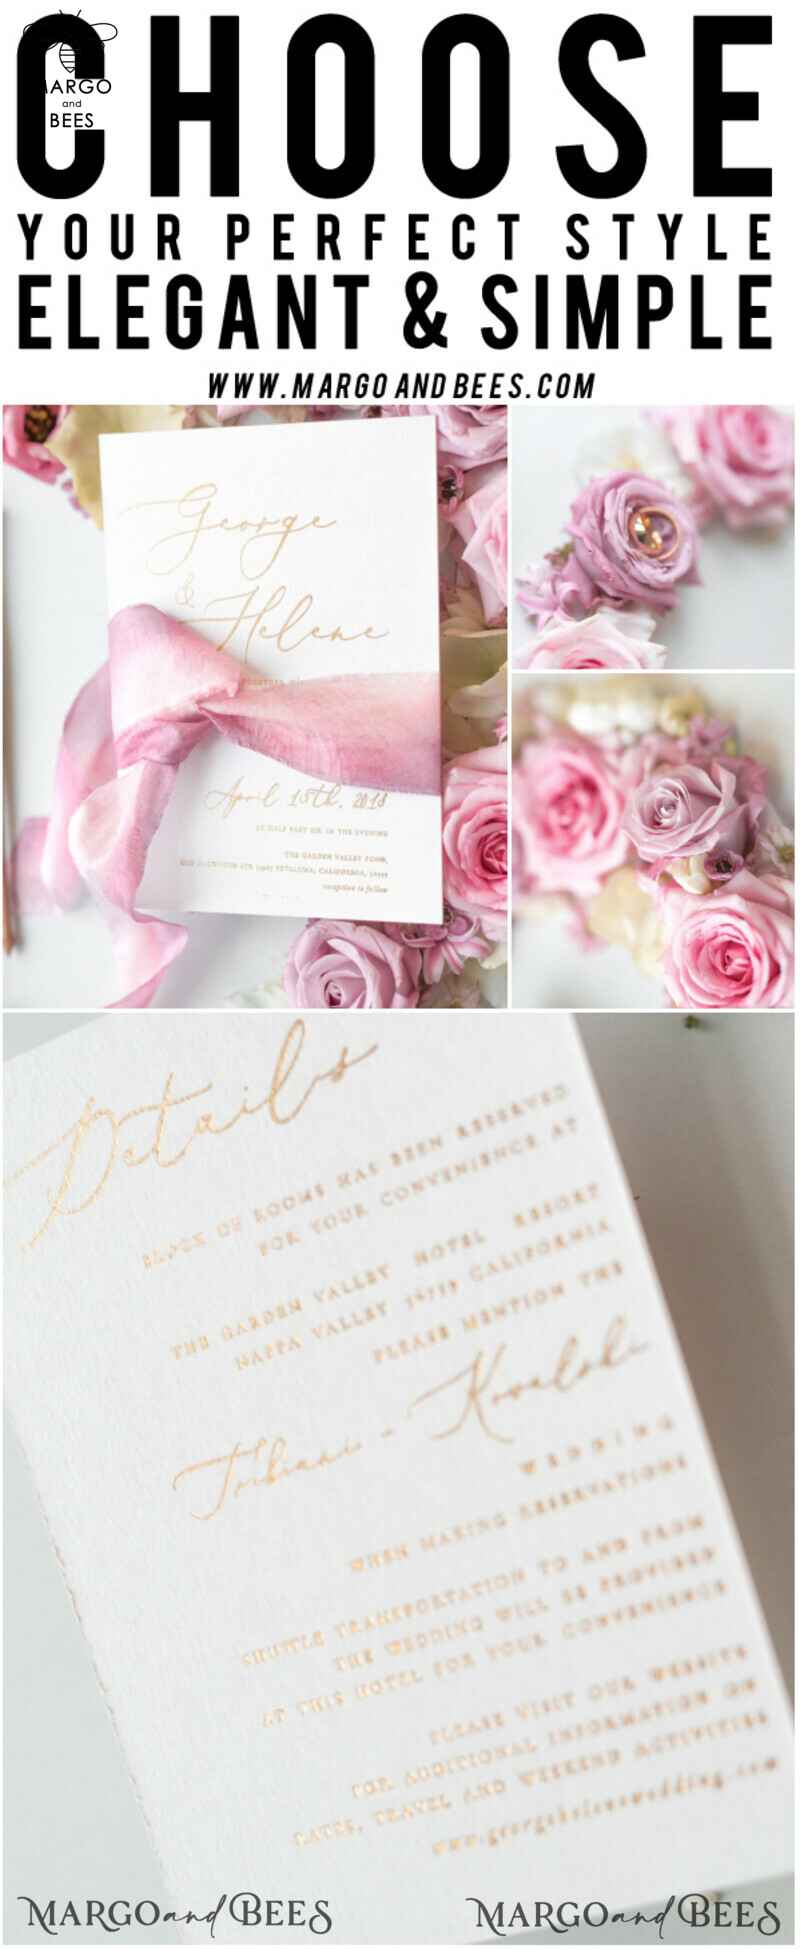 Elegant Personalized Wedding Invitations Romantic Stationery with Vintage Garden Roses and  Handmade Silk Bow Gold Foil Letters  Blush Pink Envelope -43